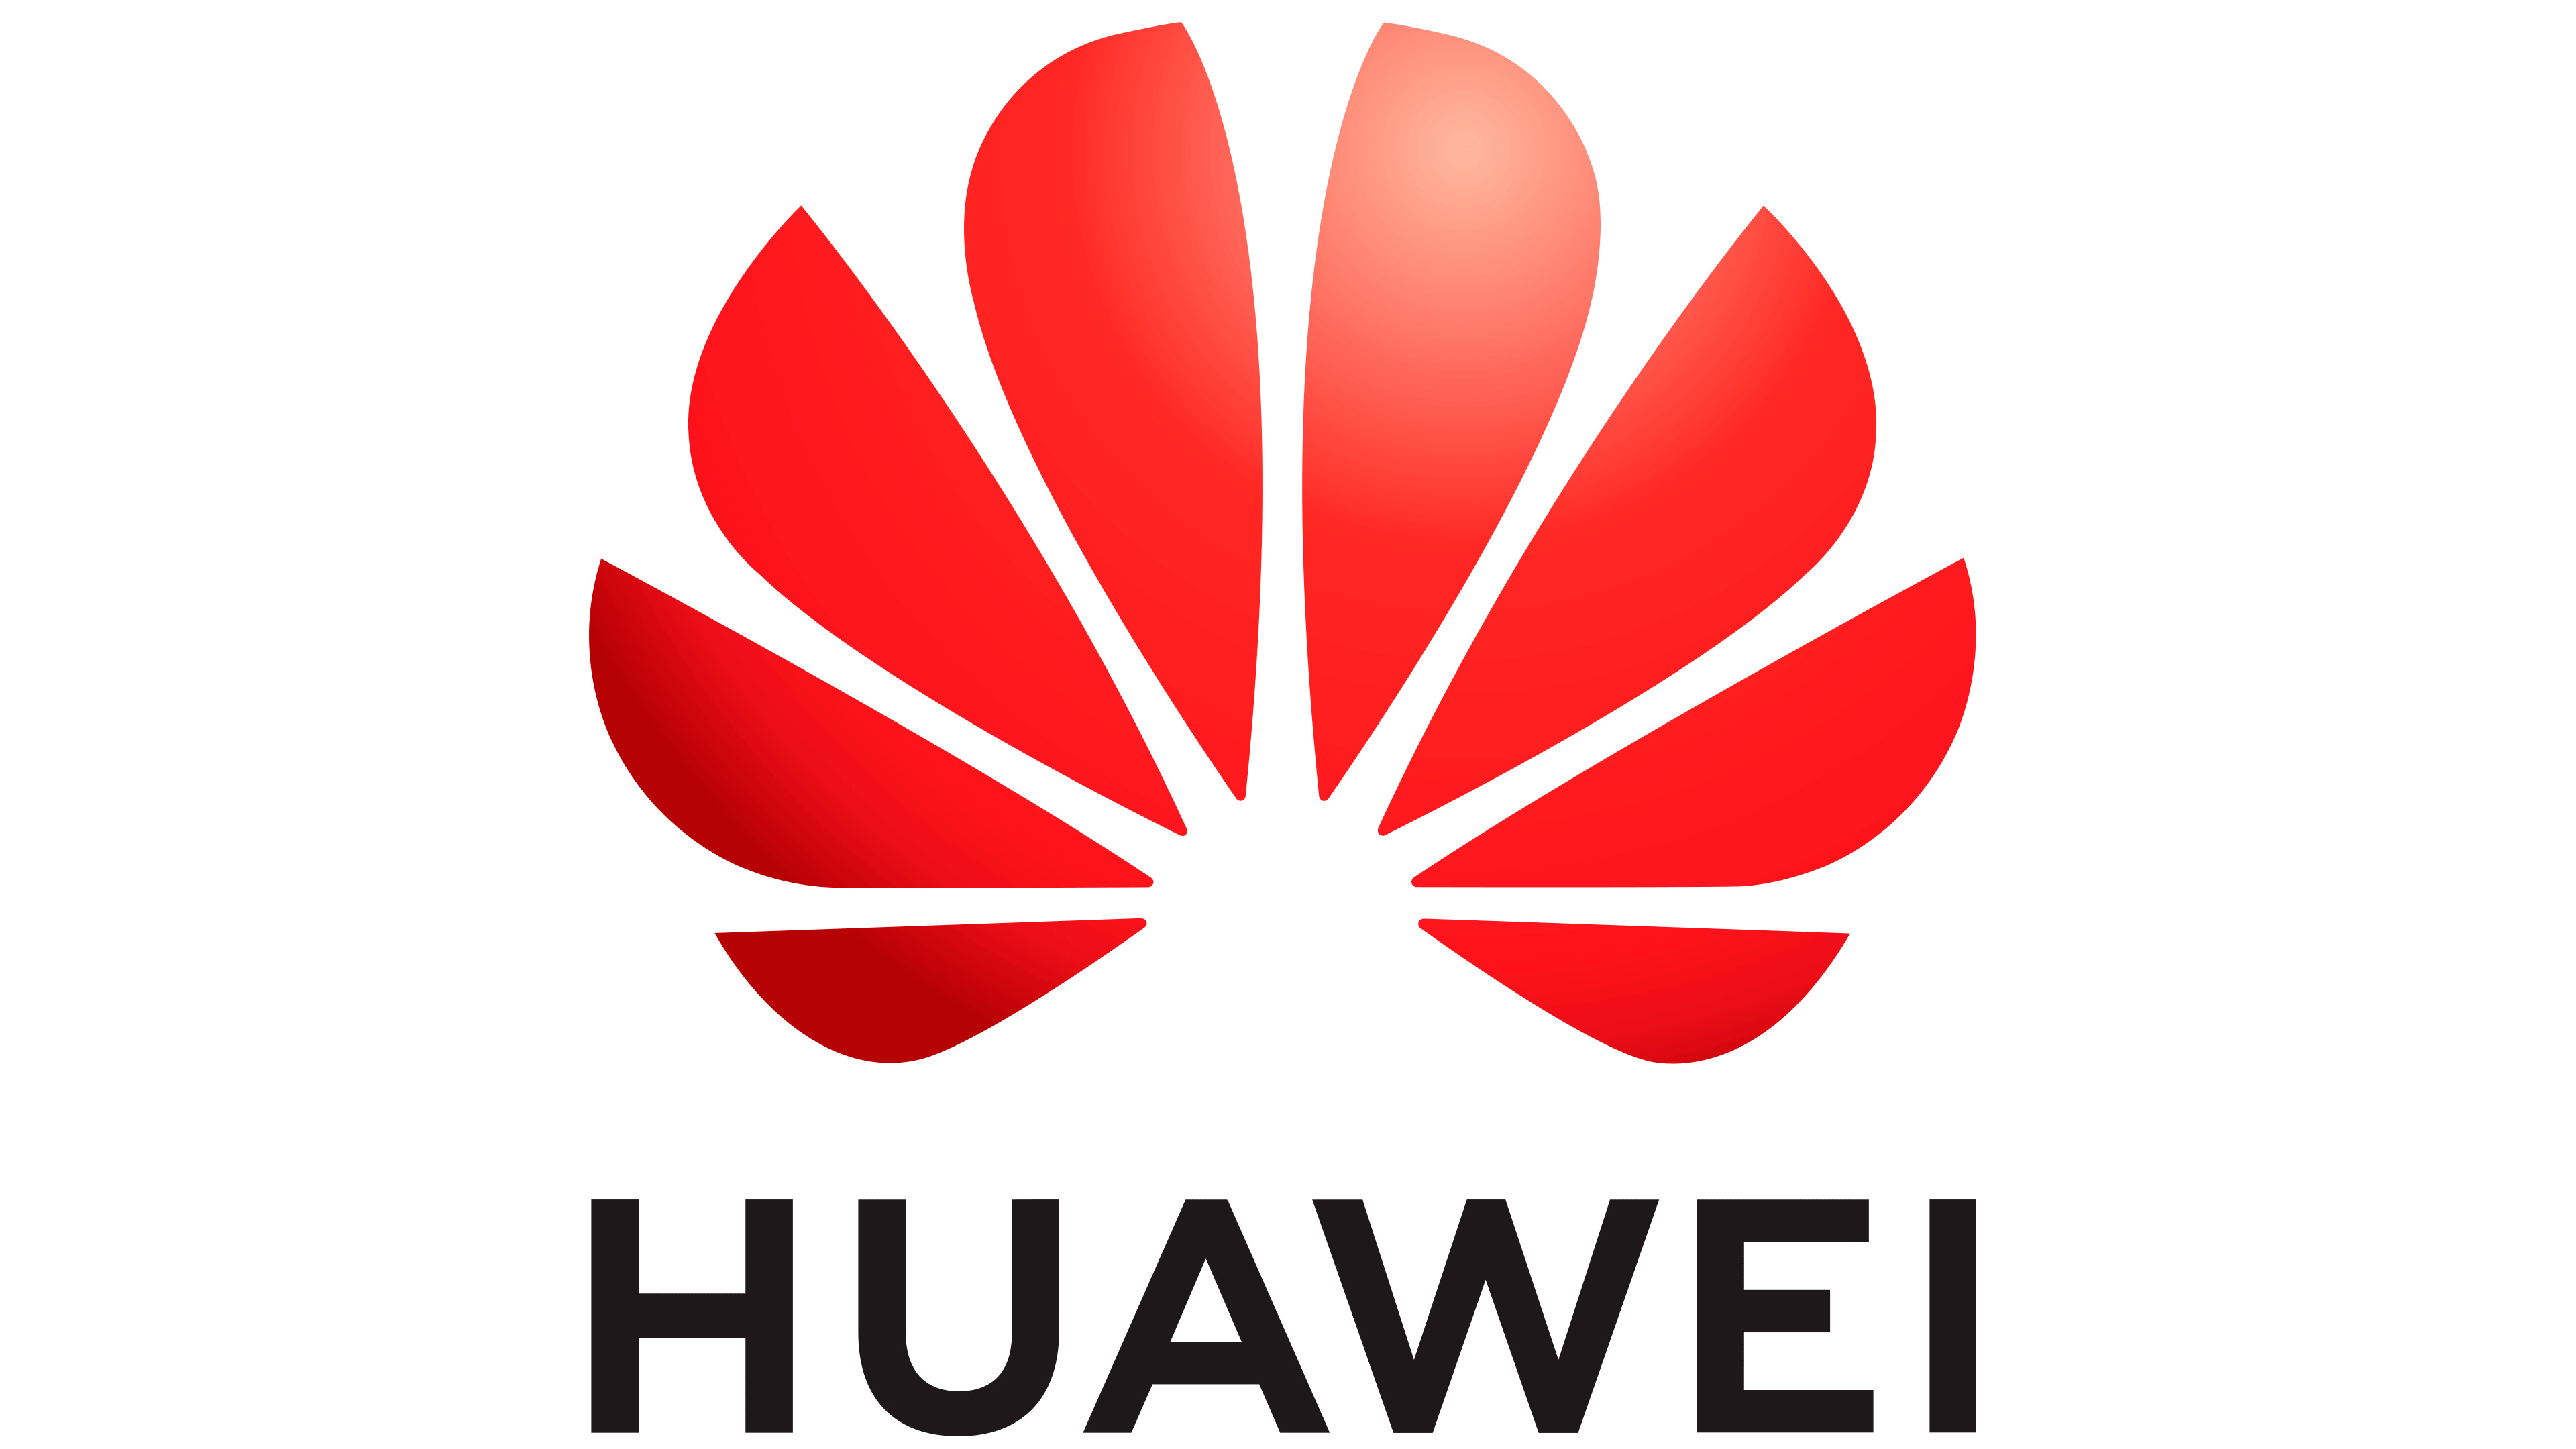 Huawei specialized router distributor, Huawei distributor routers, Smart home, 3840x2160 4K Desktop